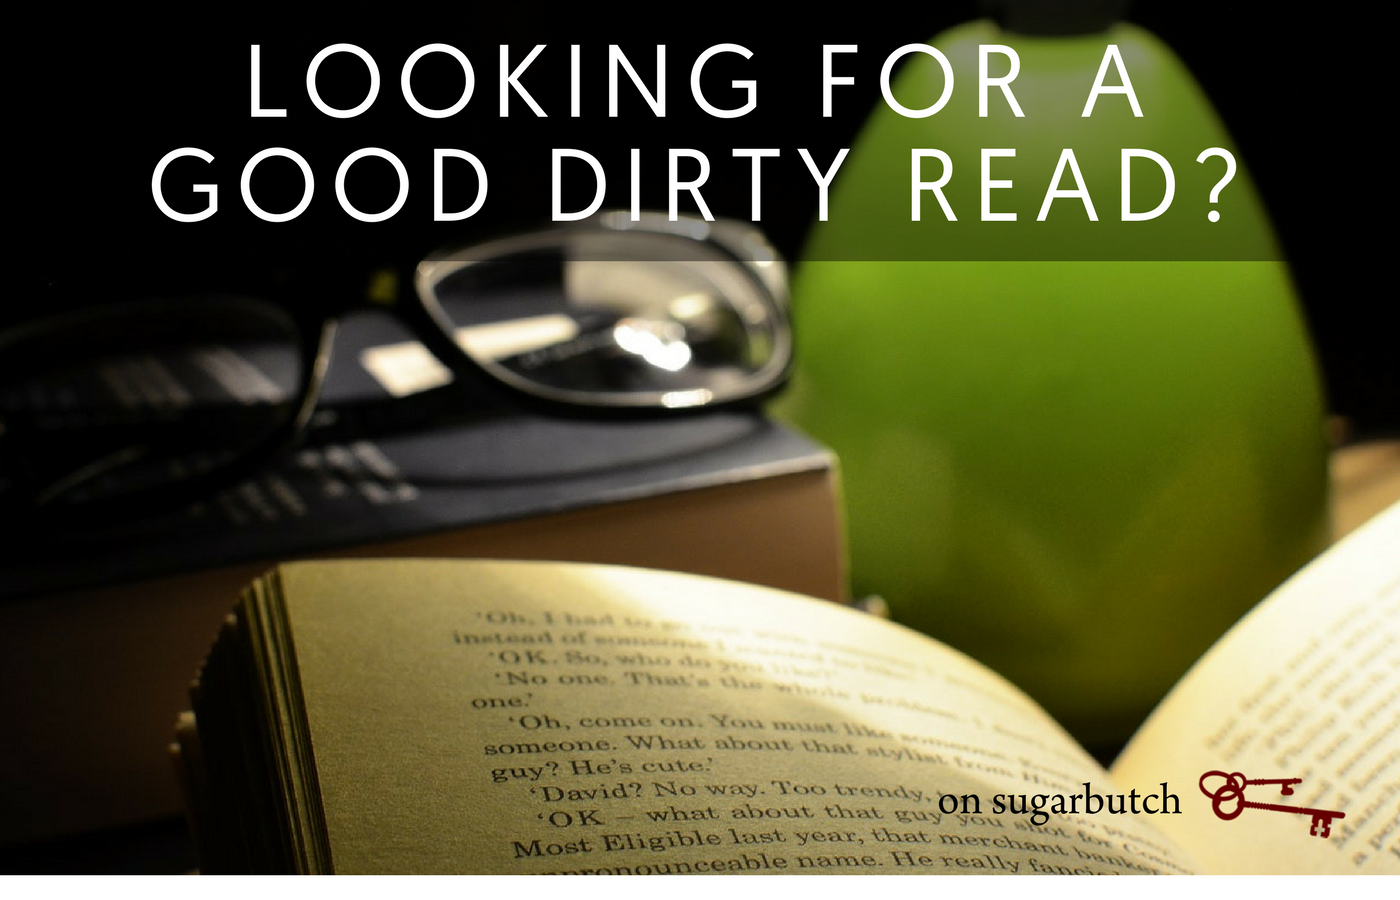 Looking for a good dirty read? Here ya go